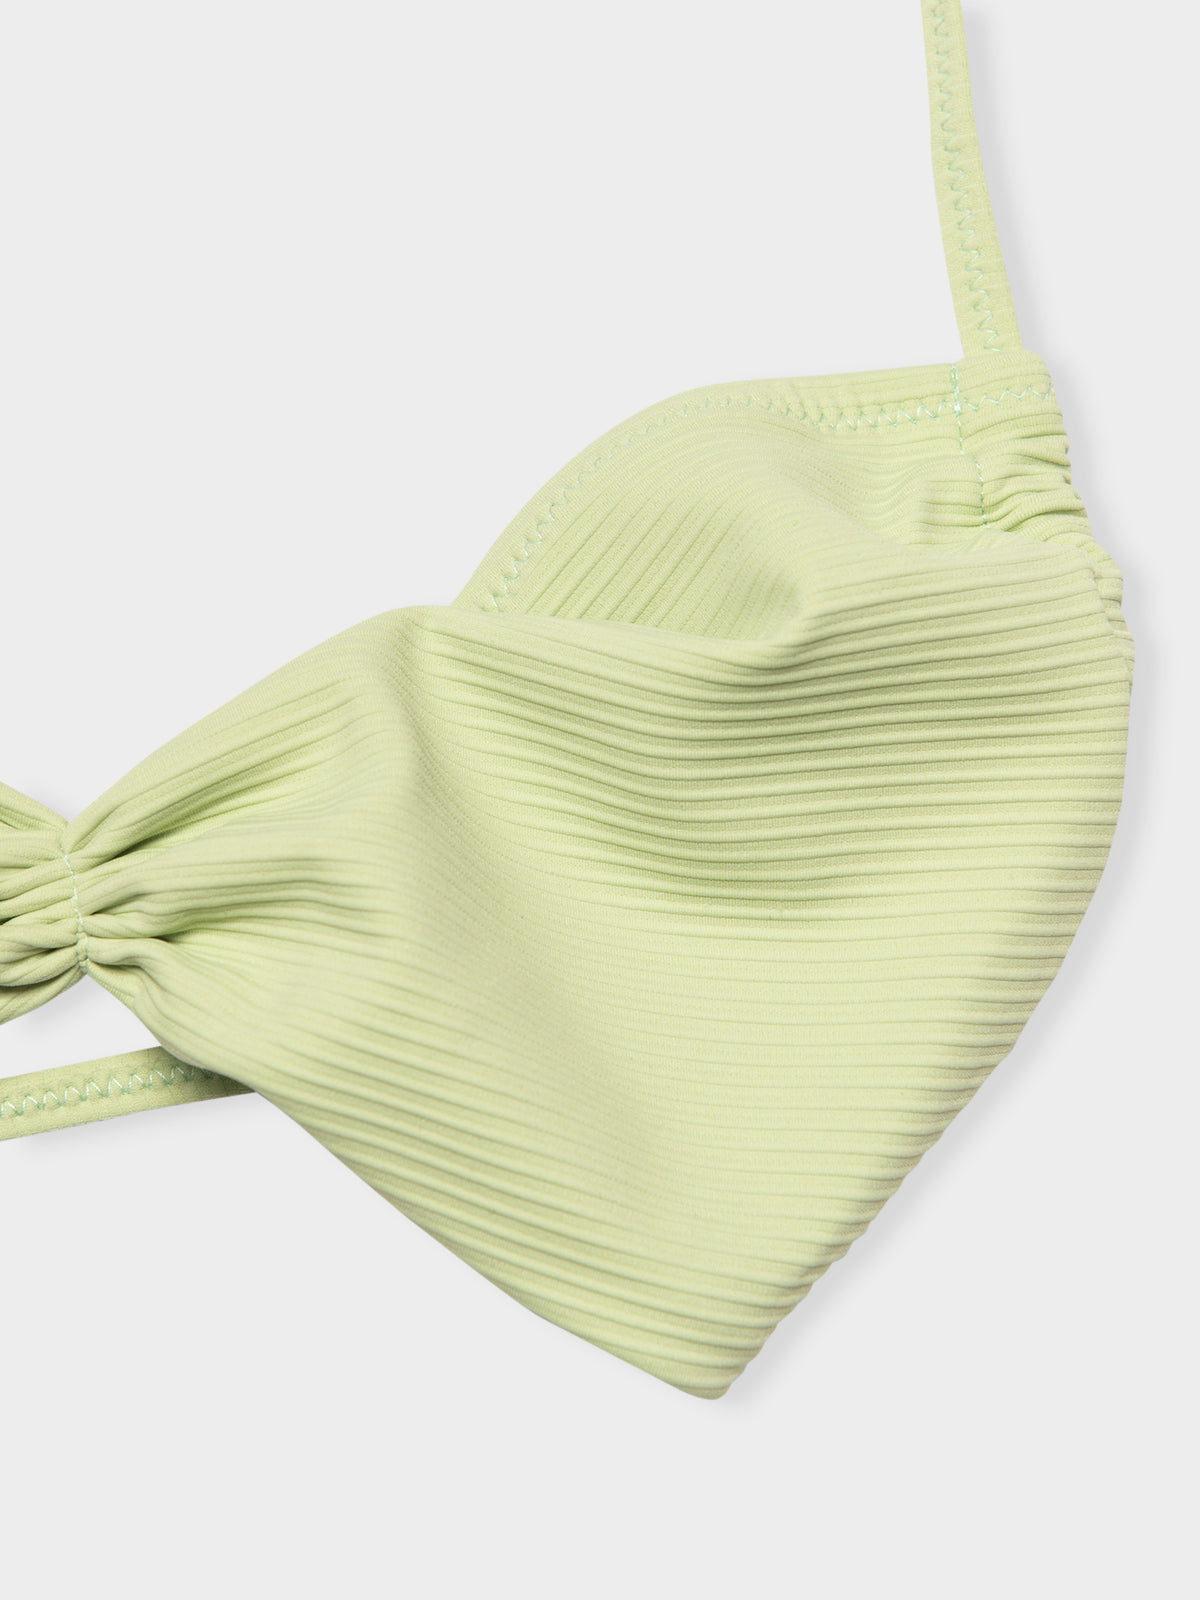 Plain Ribbed Ruched-Front Halter Bikini Top in Apple Green